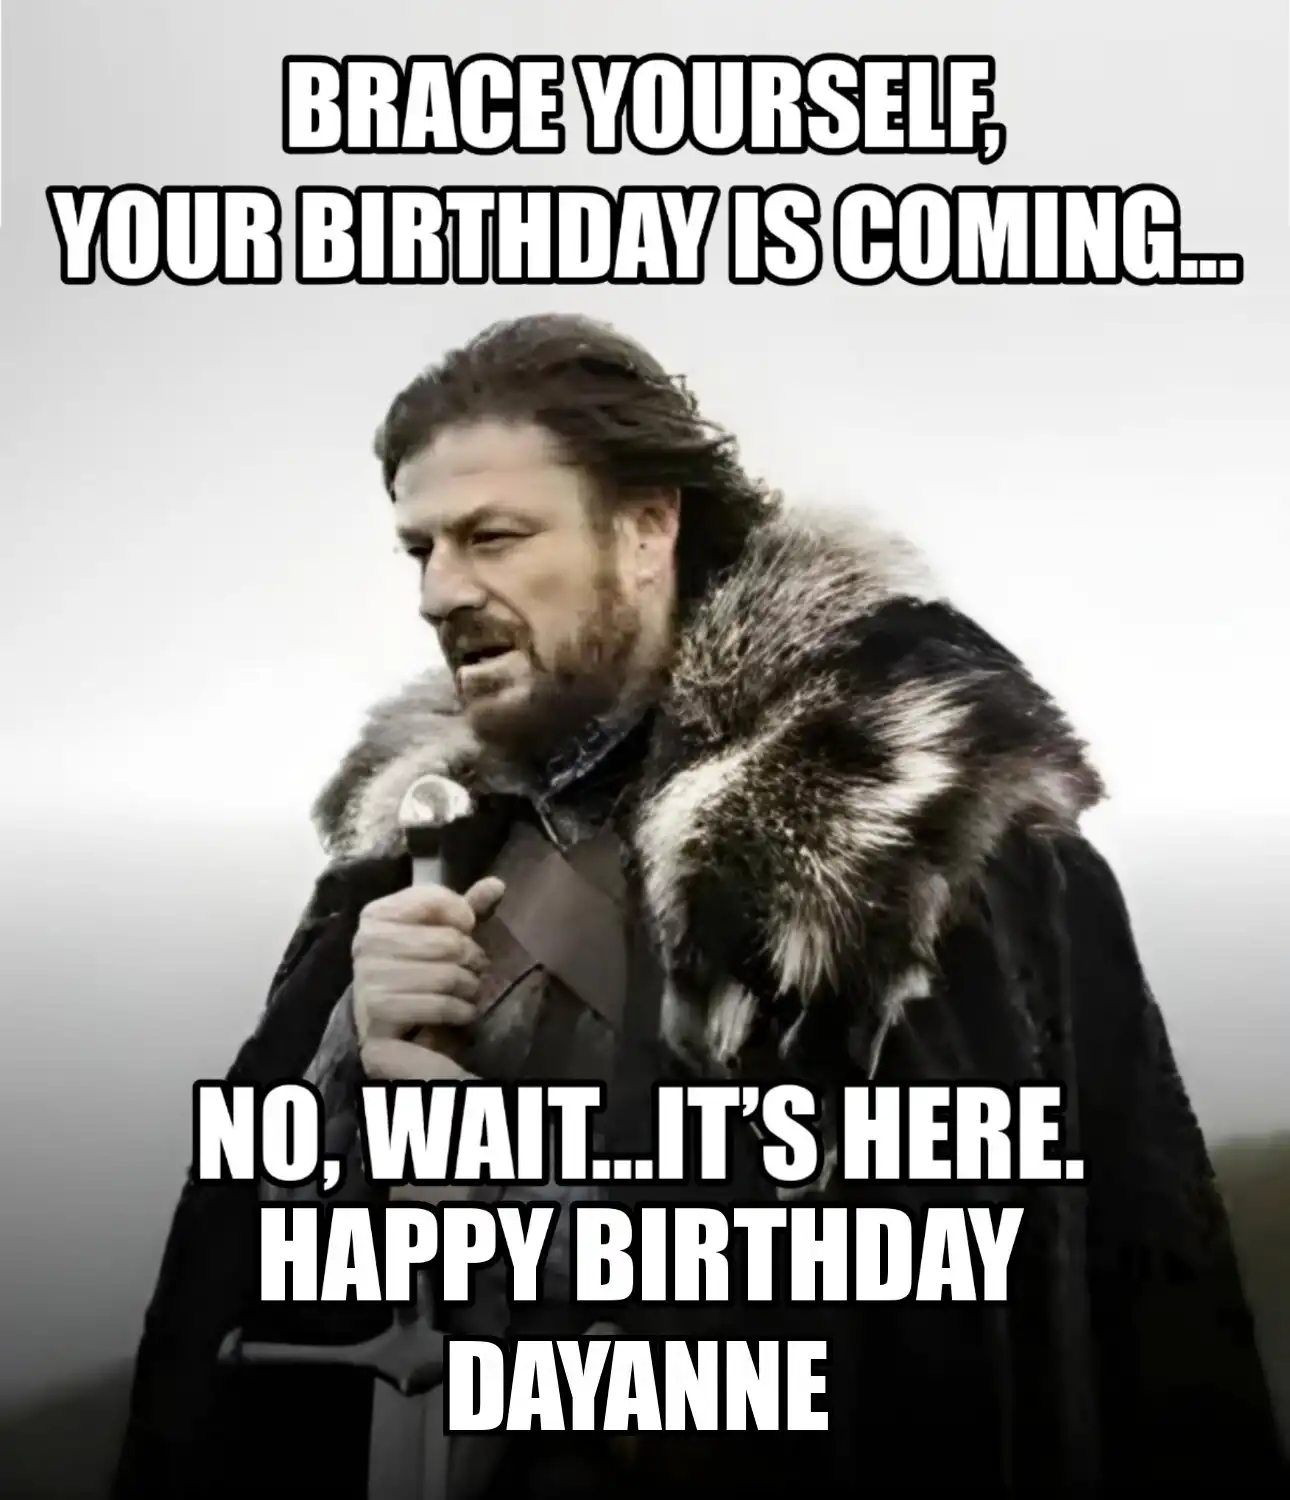 Happy Birthday Dayanne Brace Yourself Your Birthday Is Coming Meme